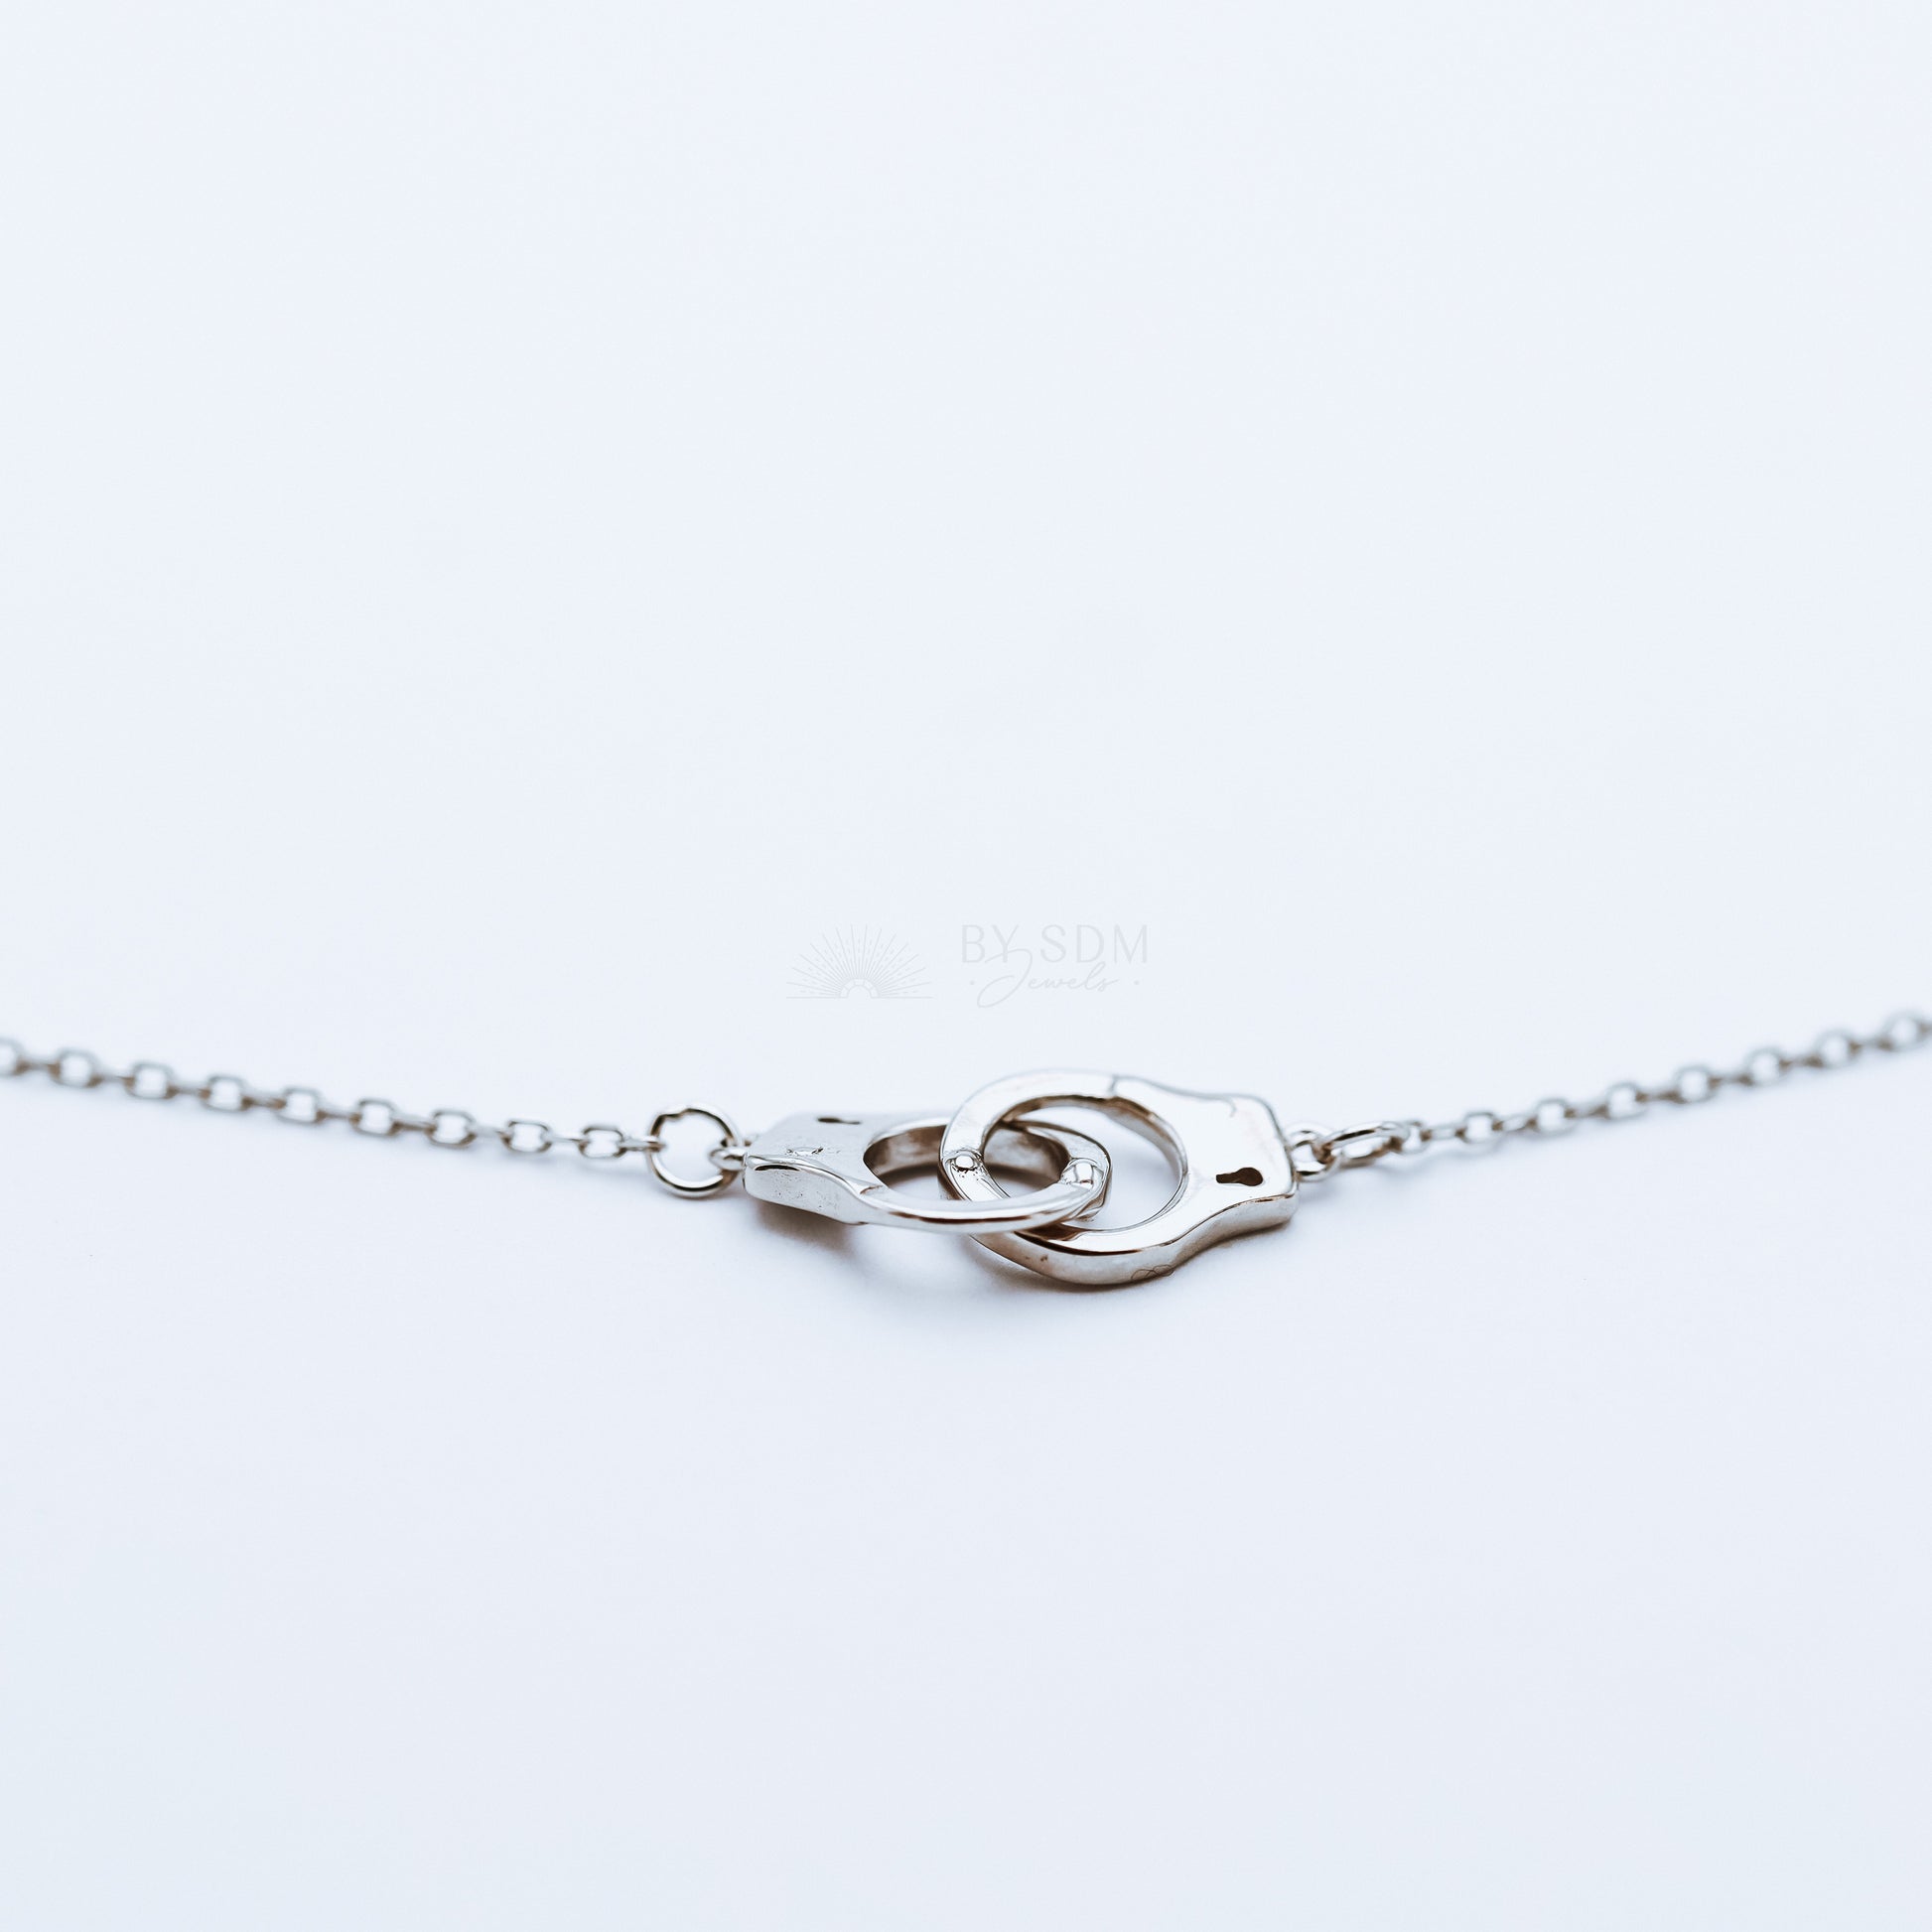 Freedom Handcuff Necklace • Dainty Eternity Necklace • Sterling Silver